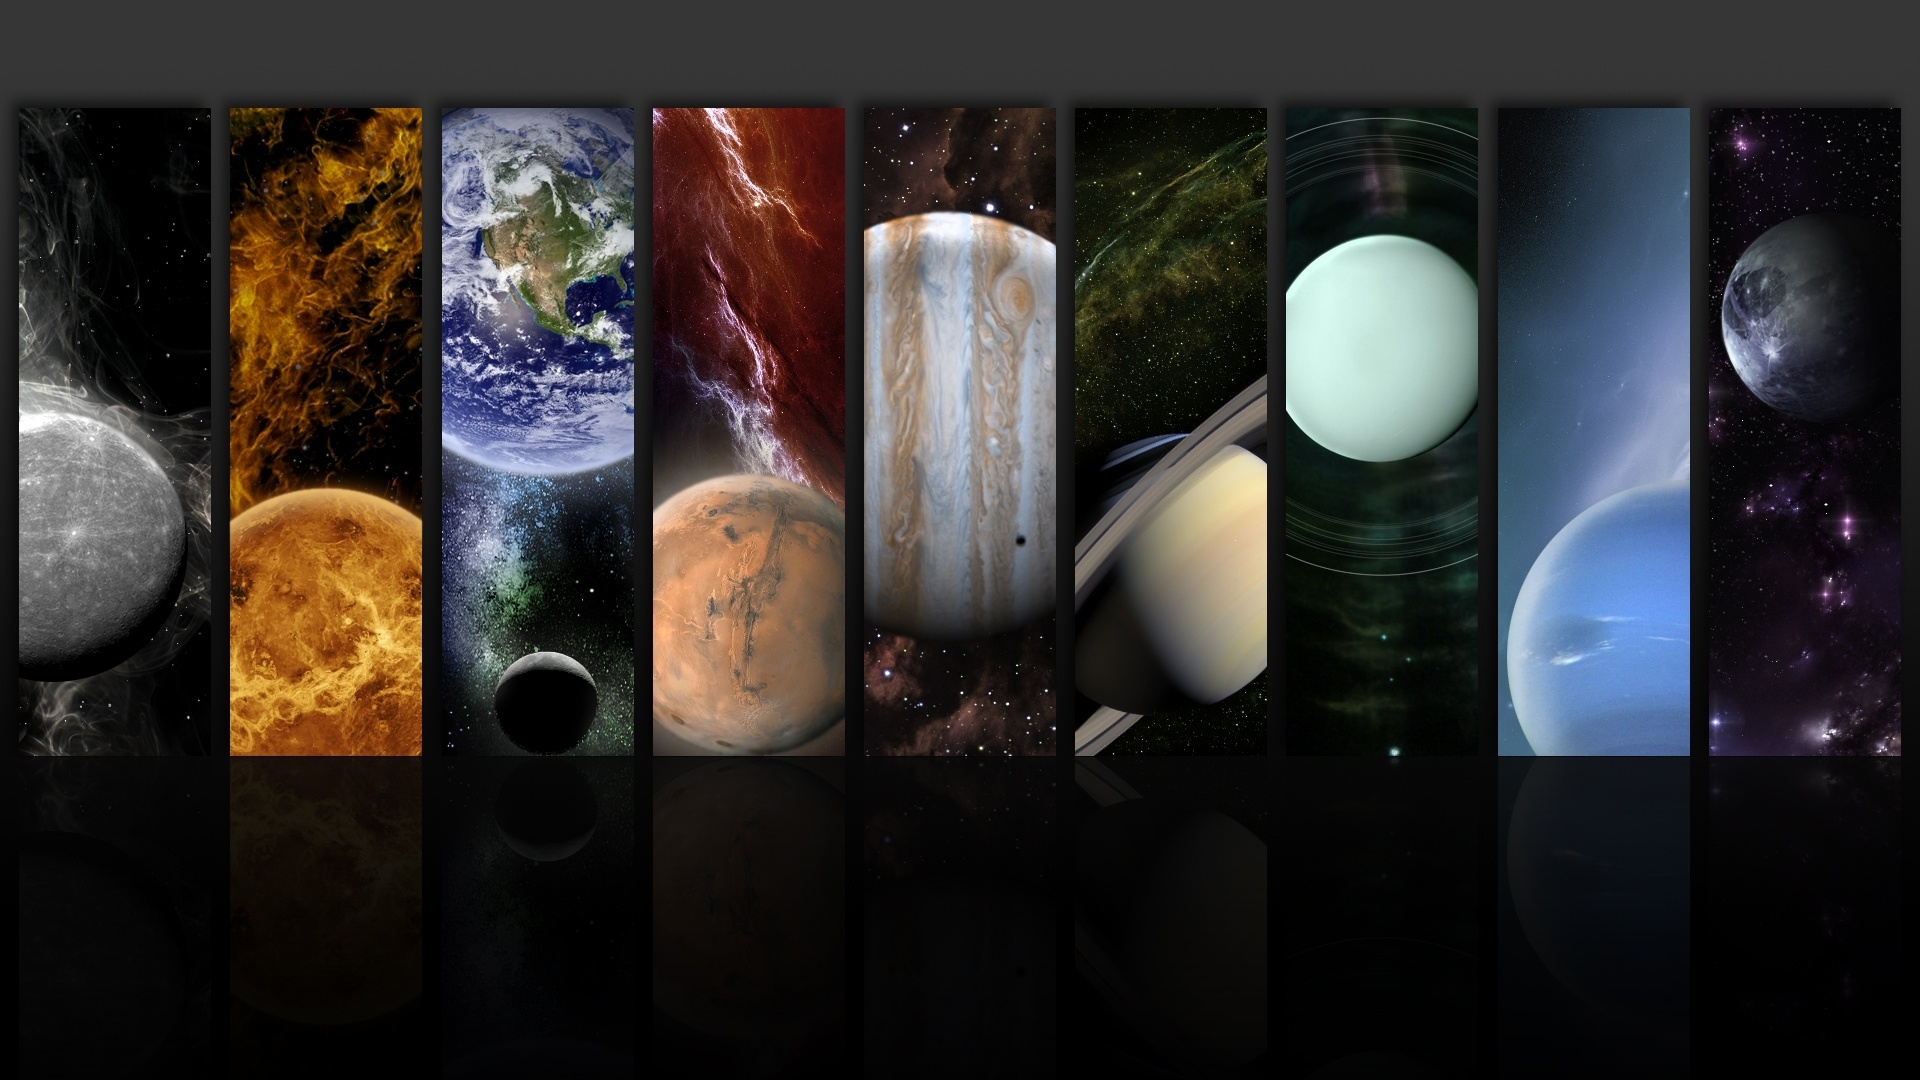 9 Planets, Outer space collage, Sci-fi wallpaper, Captivating tiles, 1920x1080 Full HD Desktop